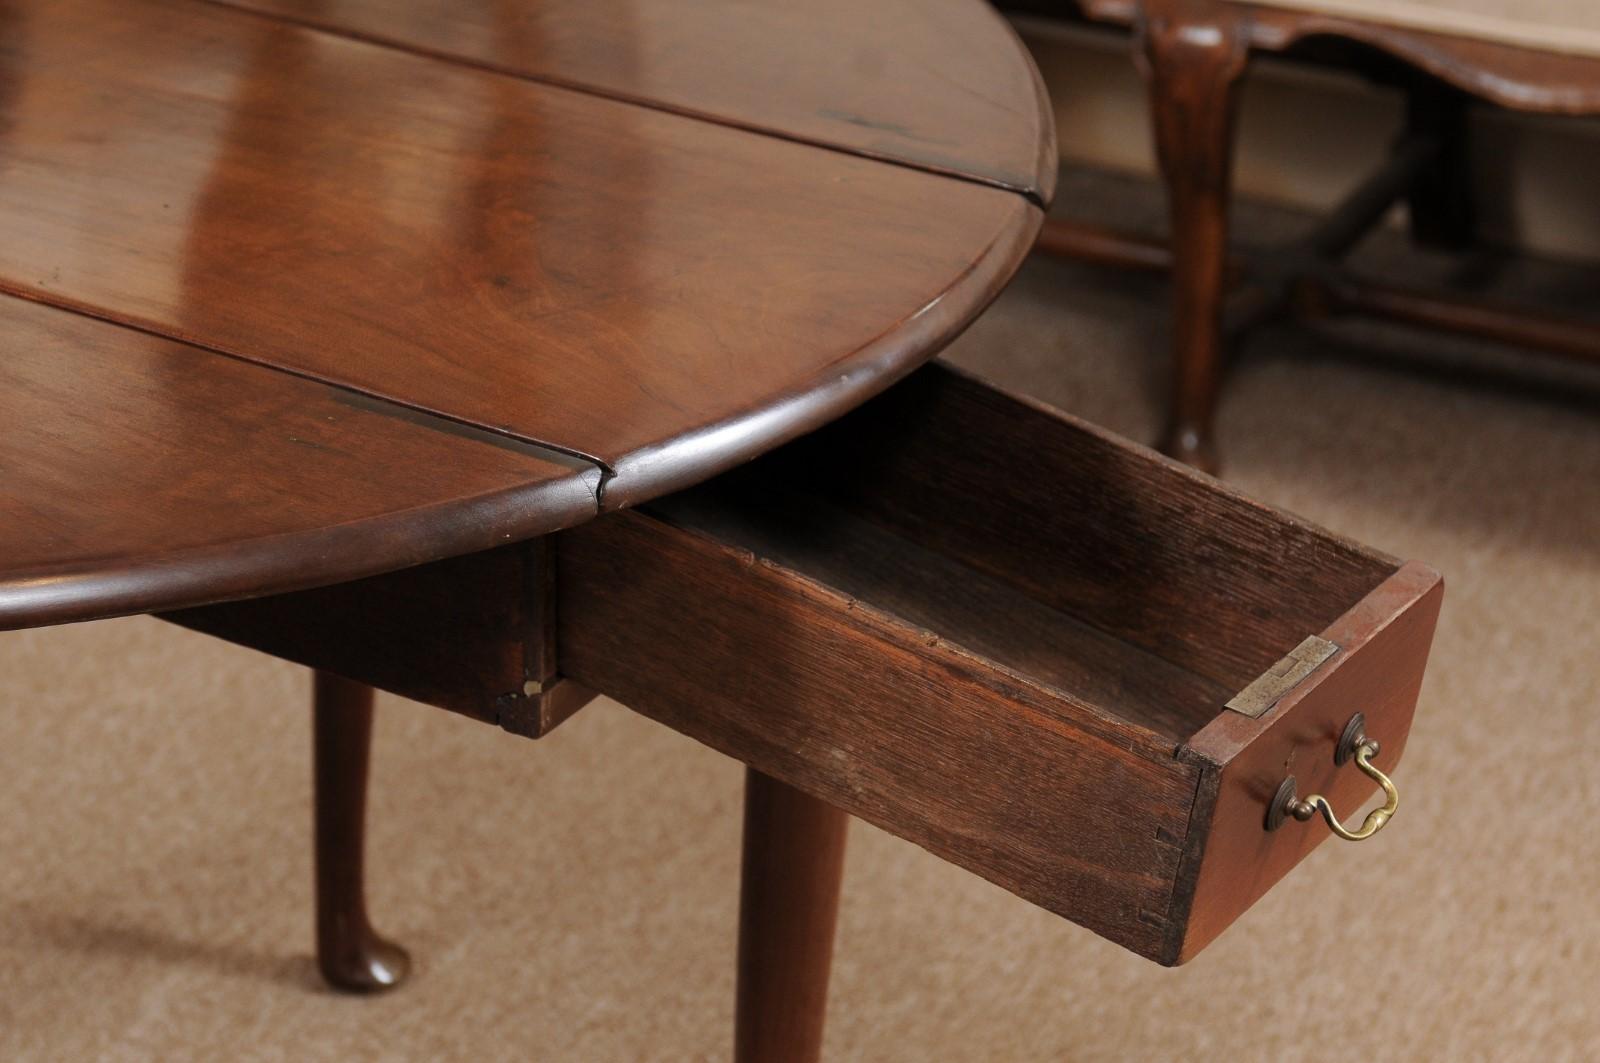 English Queen Anne Drop Leaf Table in Walnut with Pad Feet